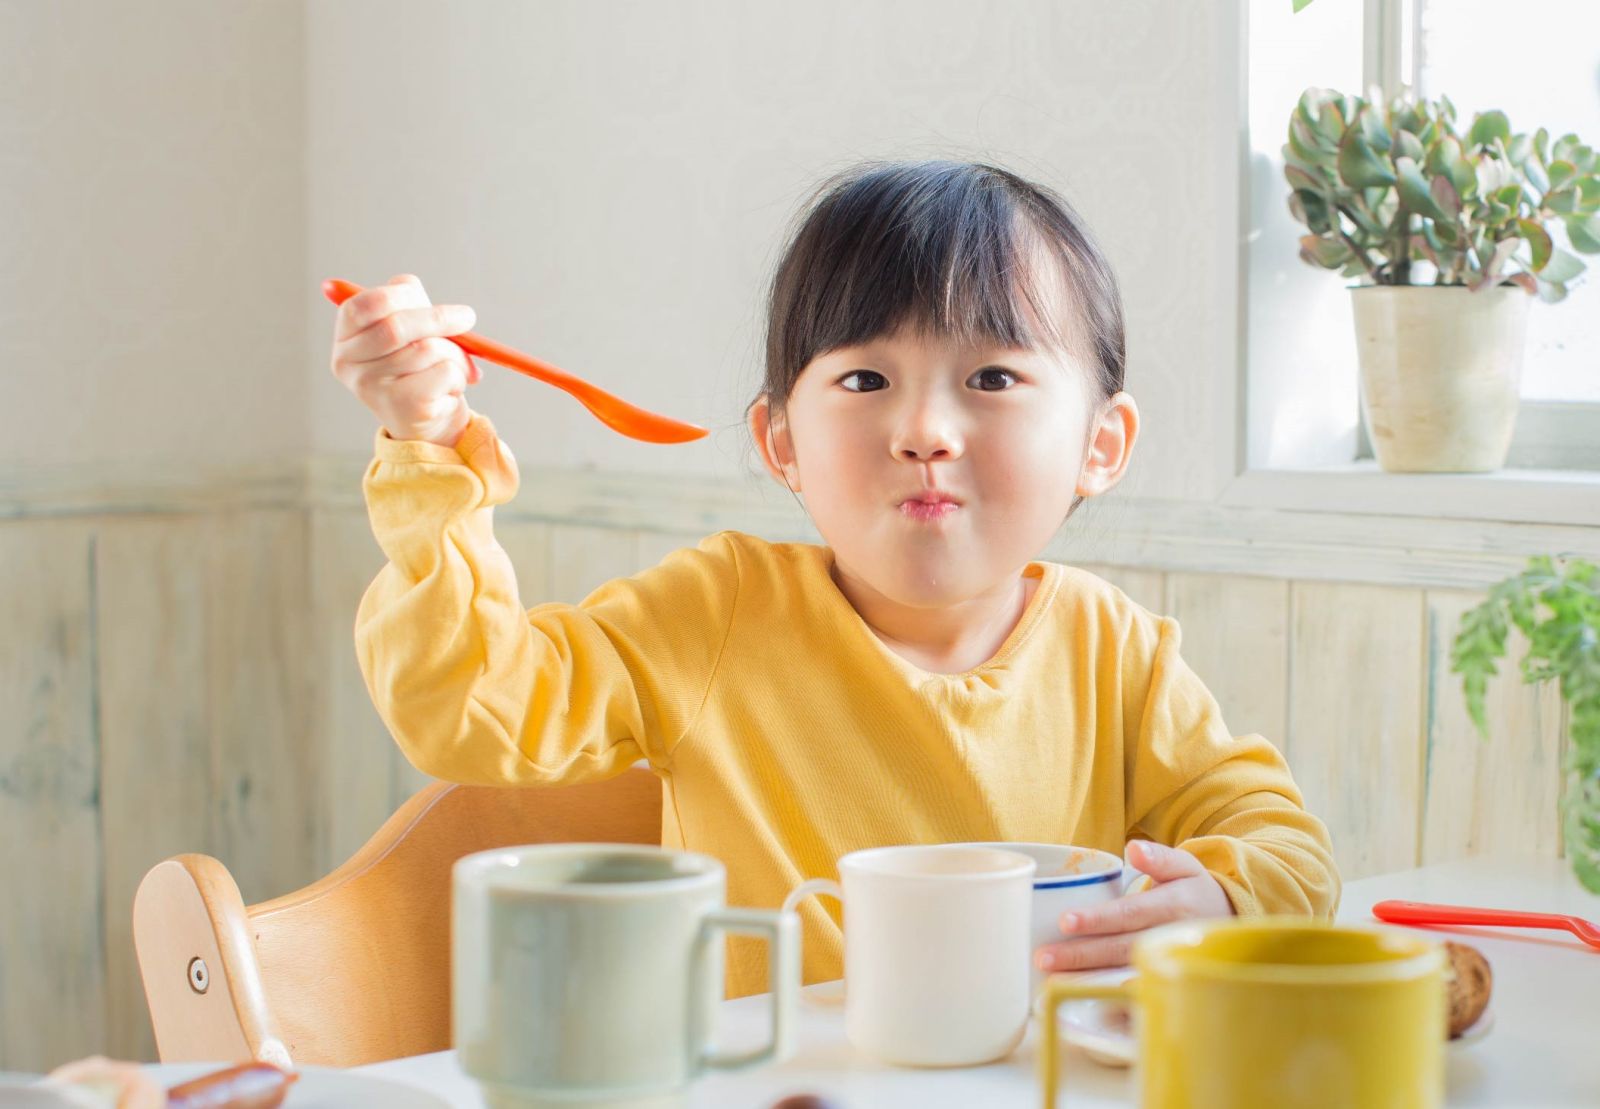 Every time you give your child breakfast, you need to be careful so that the body does not have excess energy